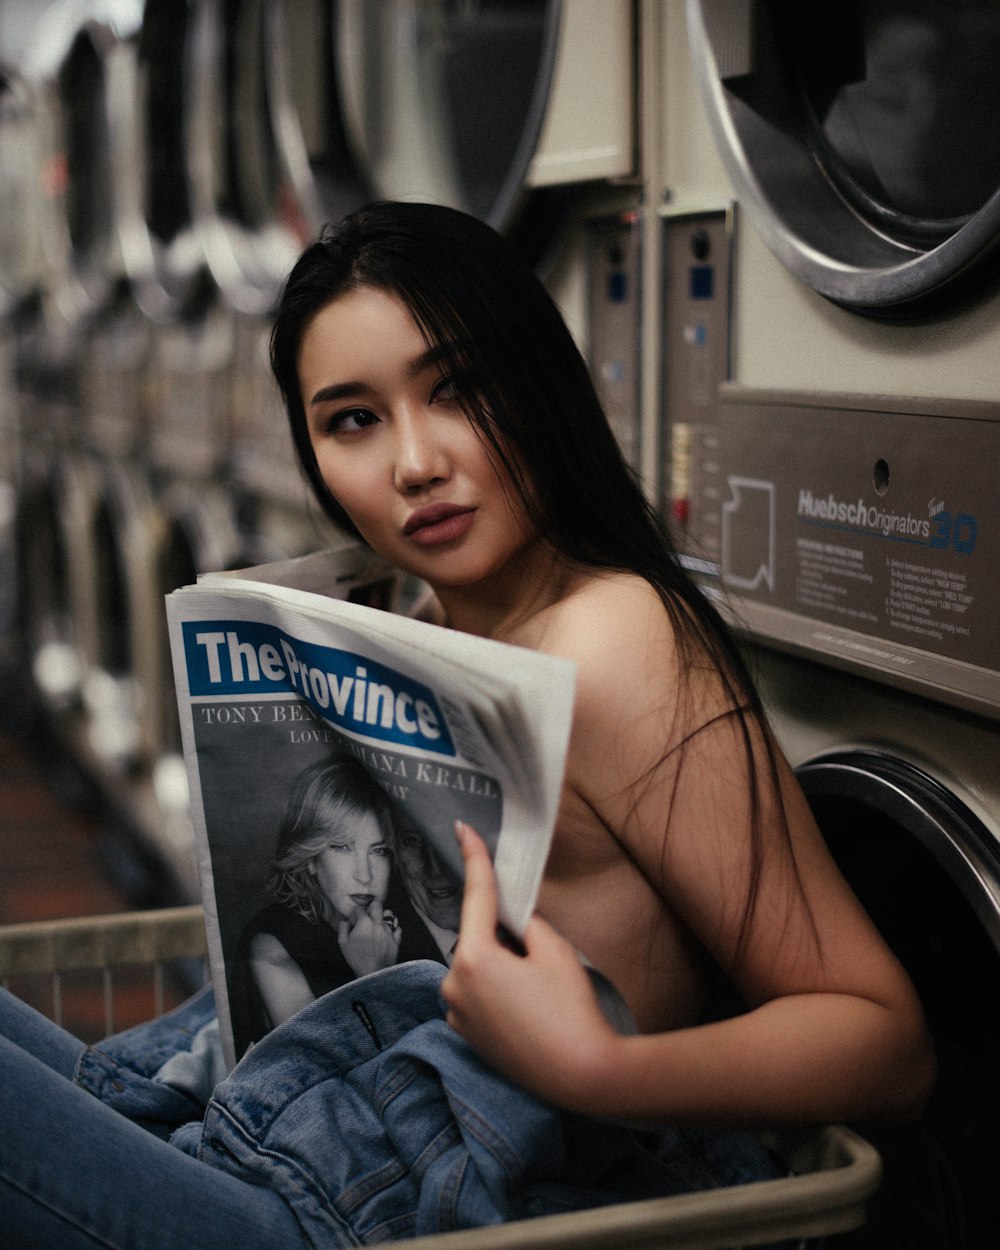 a woman sitting in a laundry machine reading a newspaper